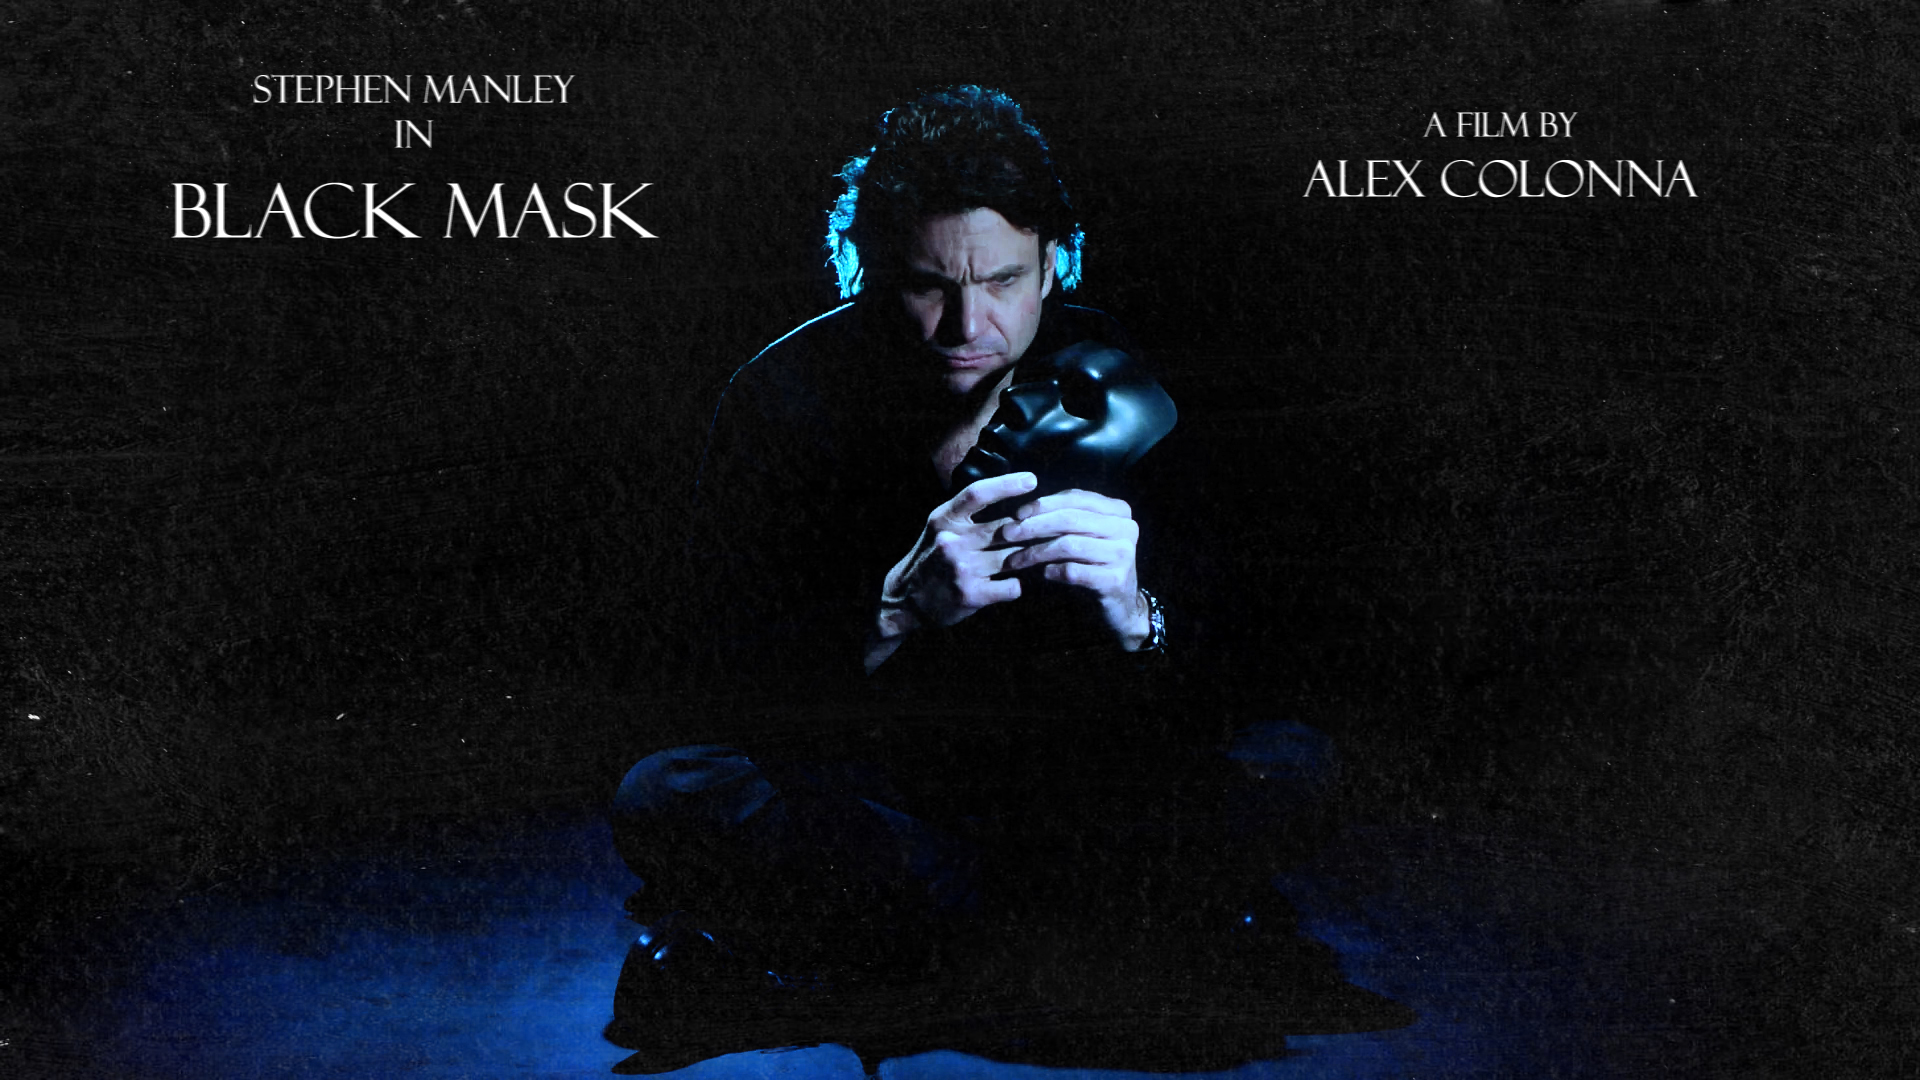 Black Mask with Stephen Manley directed by Alex Colonna